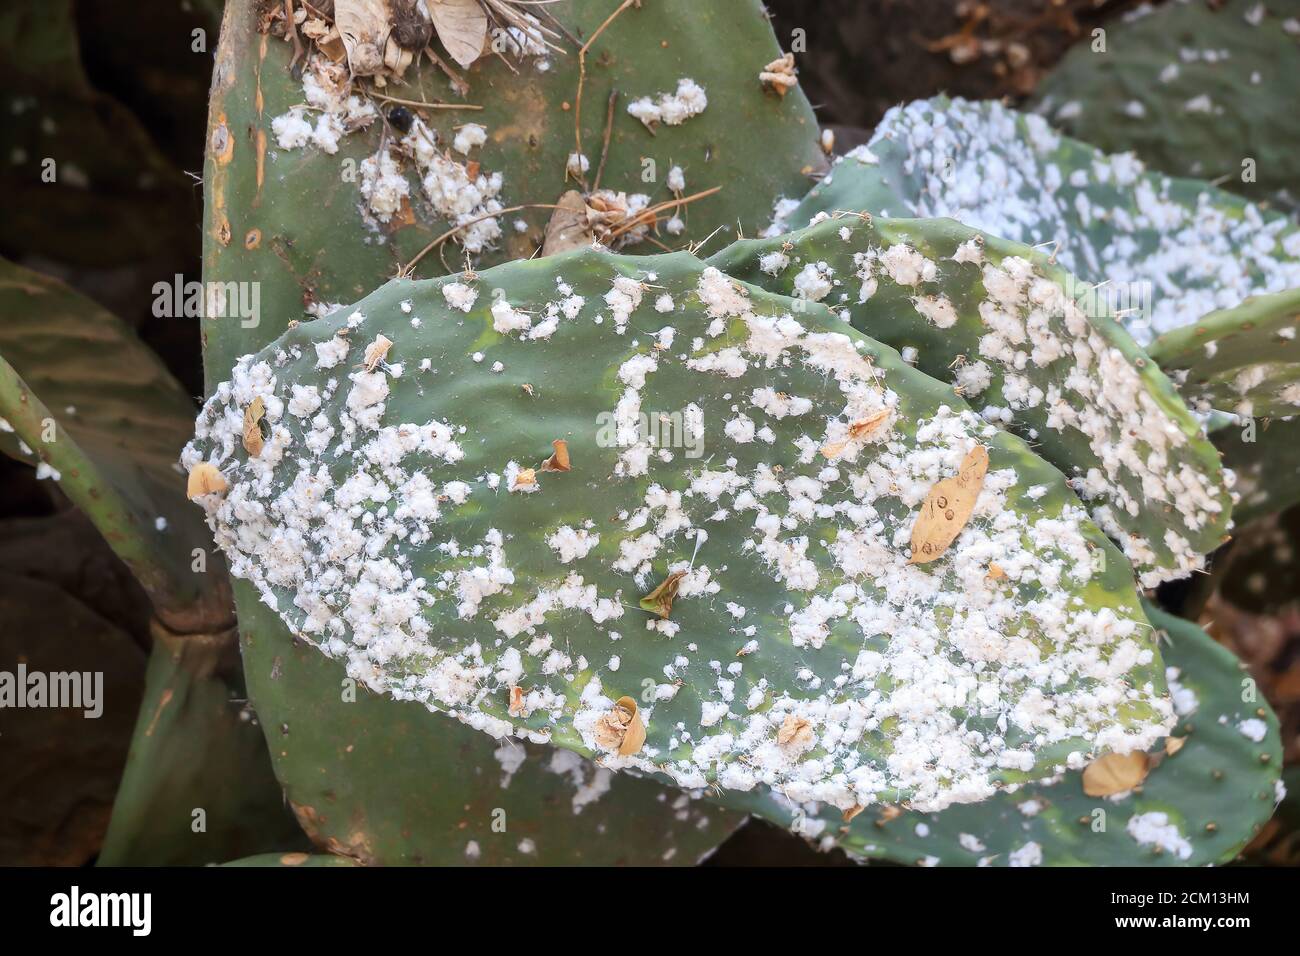 Macro photography of Prickly pears with a cochineal infestation. Shallow depth of field Stock Photo